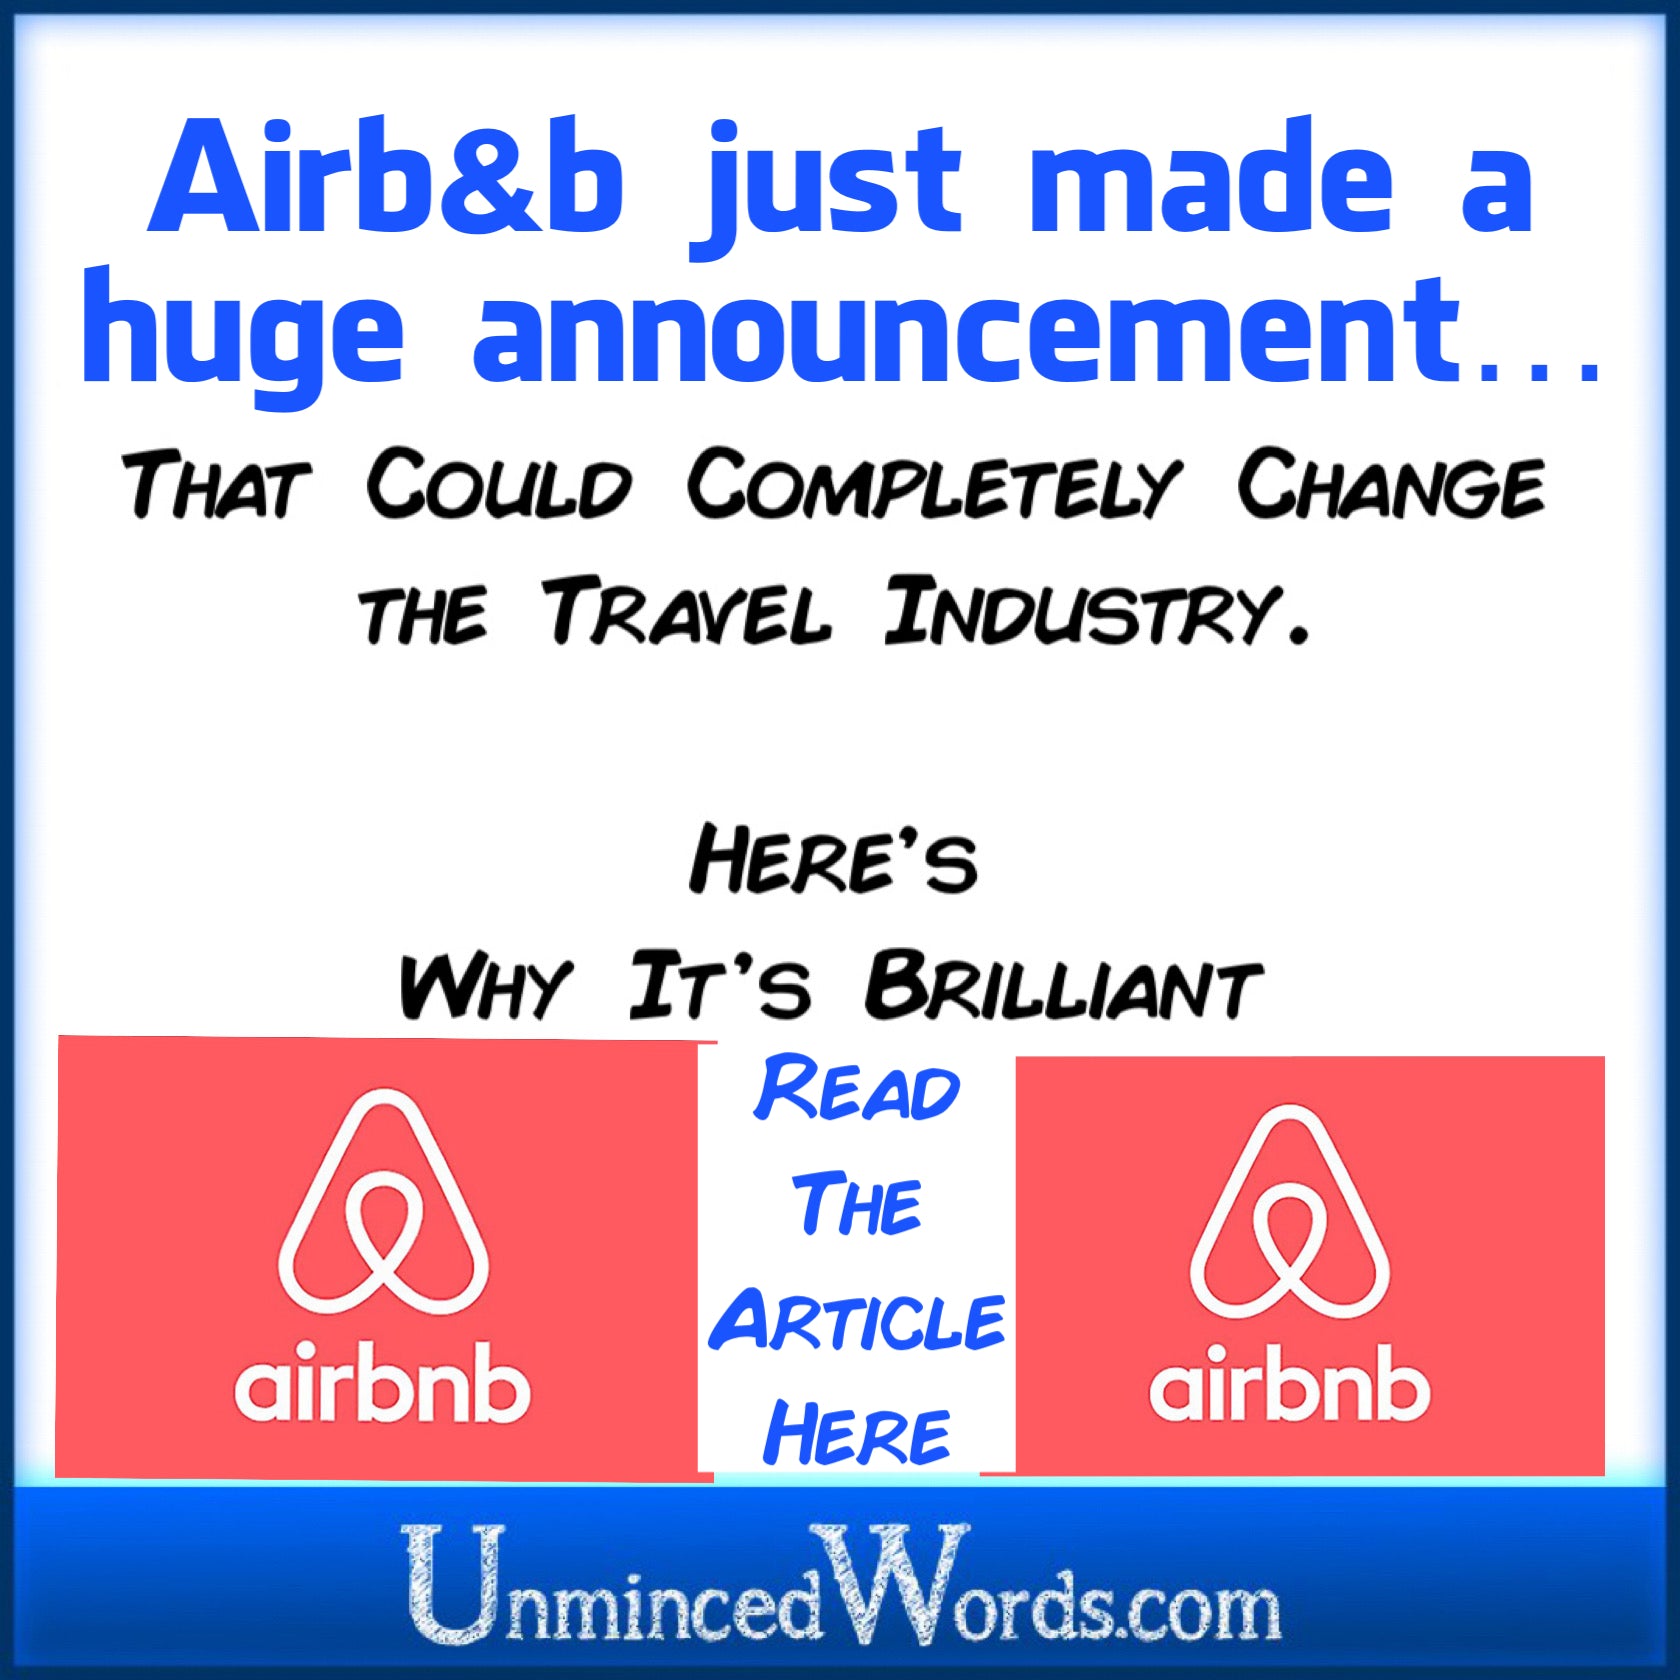 Airbnb Just Made a Huge Announcement That Could Completely Change the Travel Industry. Here’s Why It’s Brilliant